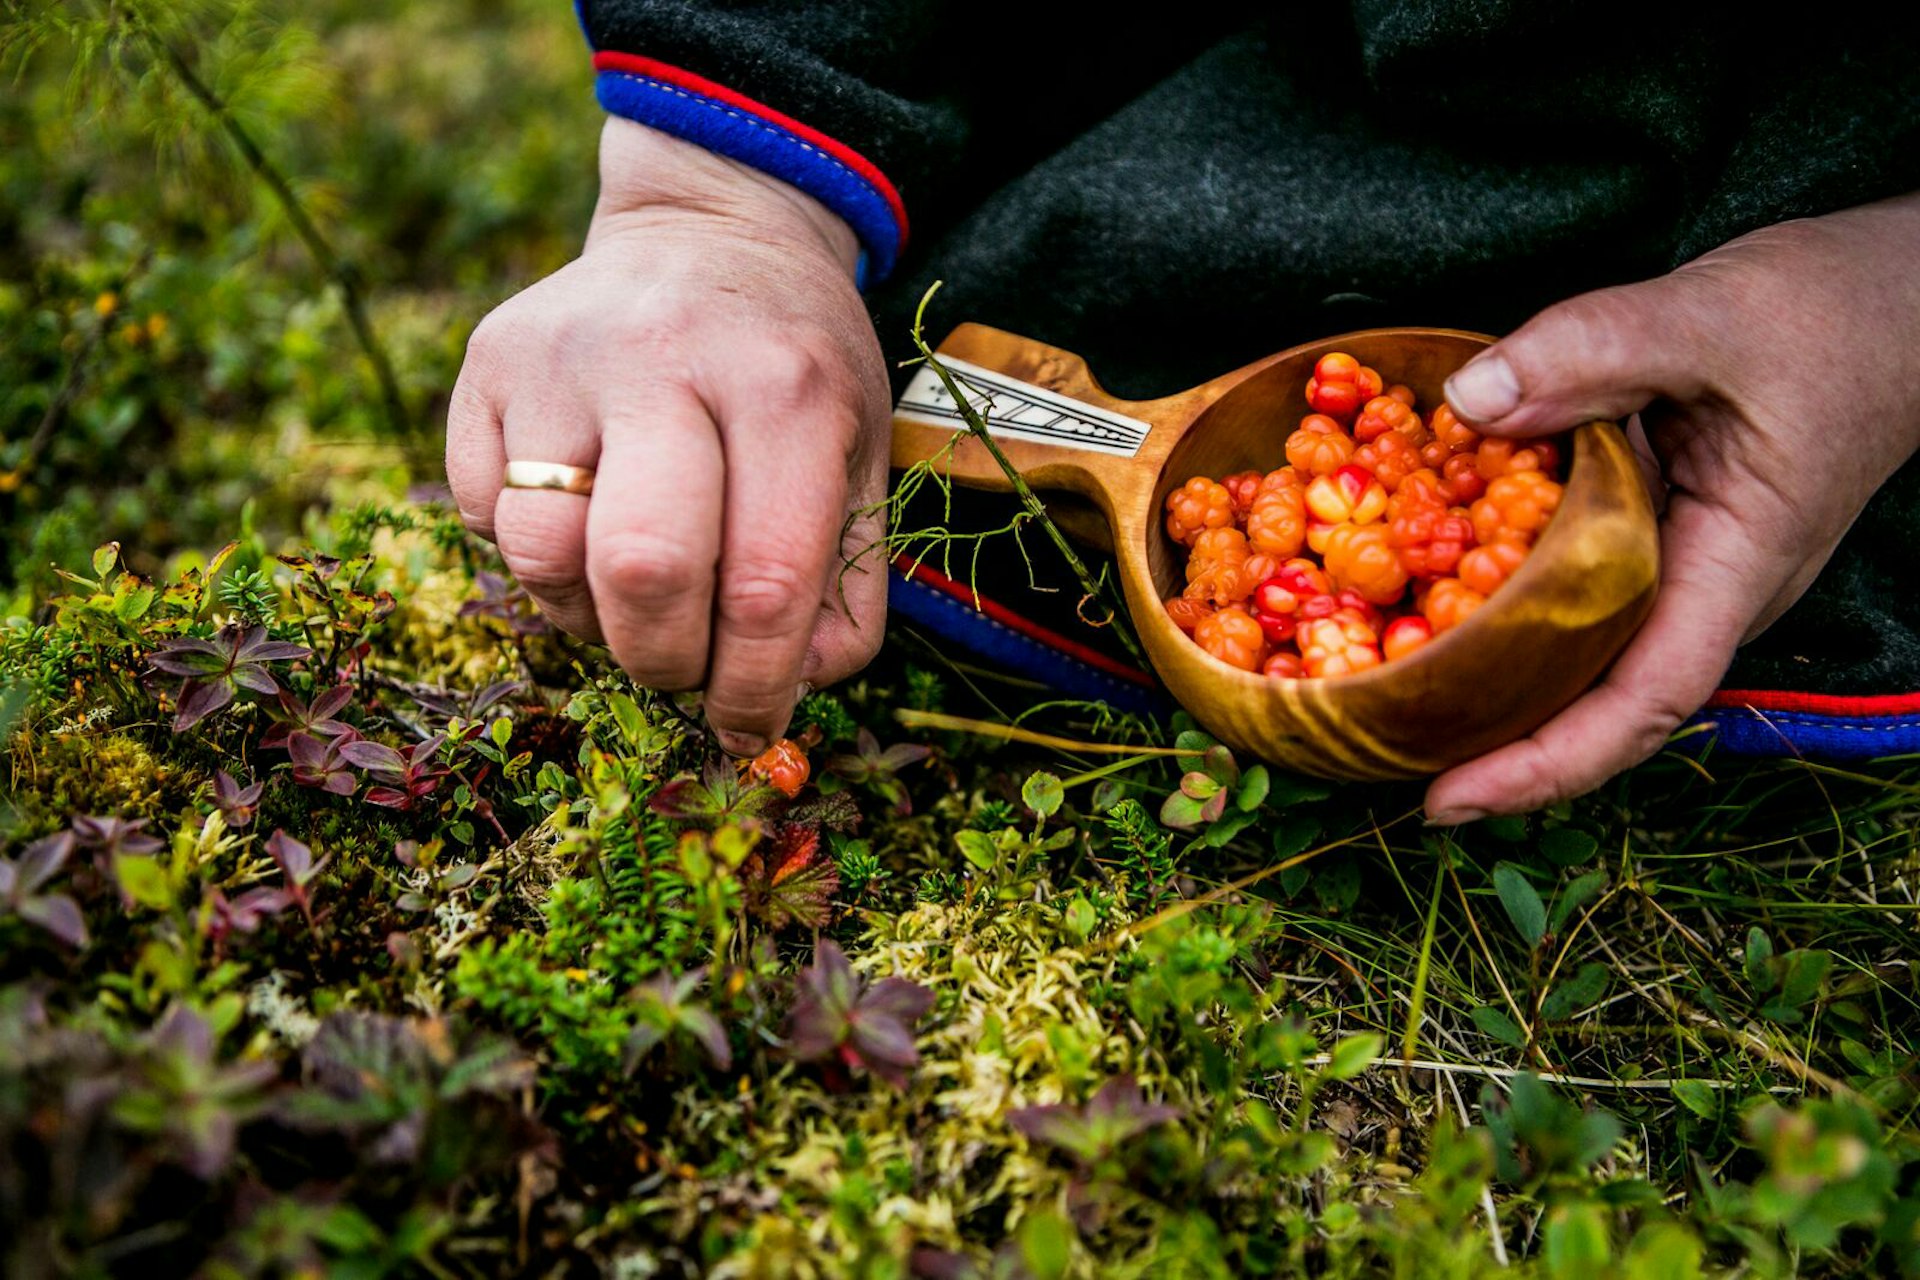 A Sami woman collecting cloudberries in Norway